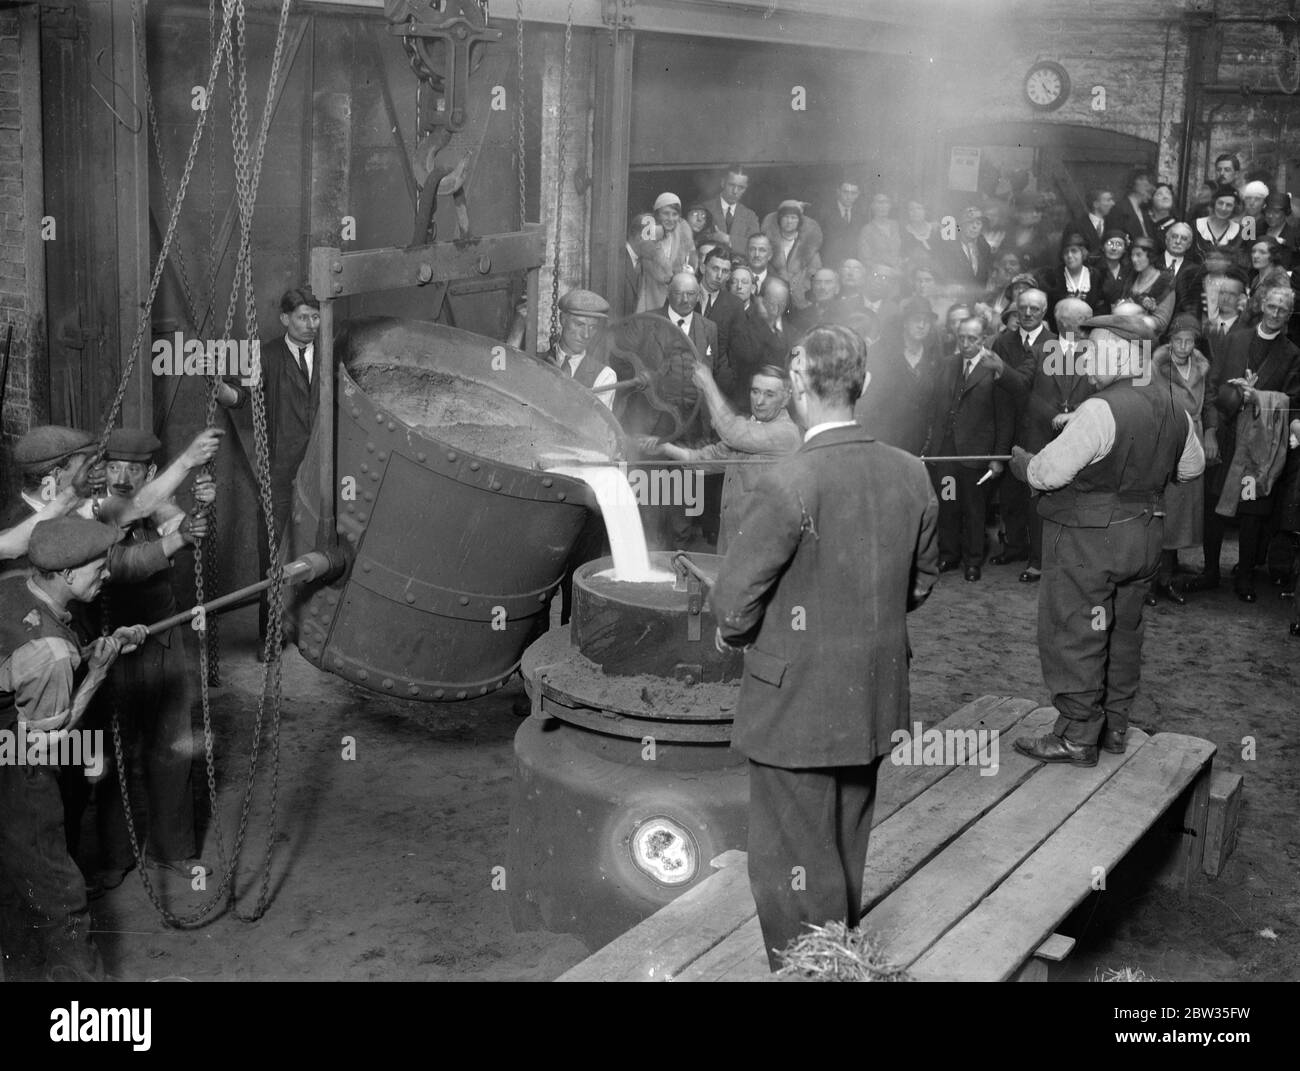 City men see last of the new Bow Bells cast with fitting ceremony at Croydon . The last of the new peal of Bow Bells was cast at the foundry of Gillett and and Johnstone at Croydon when it received the blessing of the City of London and the church . Masters of several city companies were present . The bell was a 2 1/2 tenor .The weight of the whole peal of twelve bells is 10 1/2 tons . For centuries Bow Bells have been a traditional part of the City , but they have not been heard for six years because of the need for their being recast and because of the defective condition of the belfry of St Stock Photo